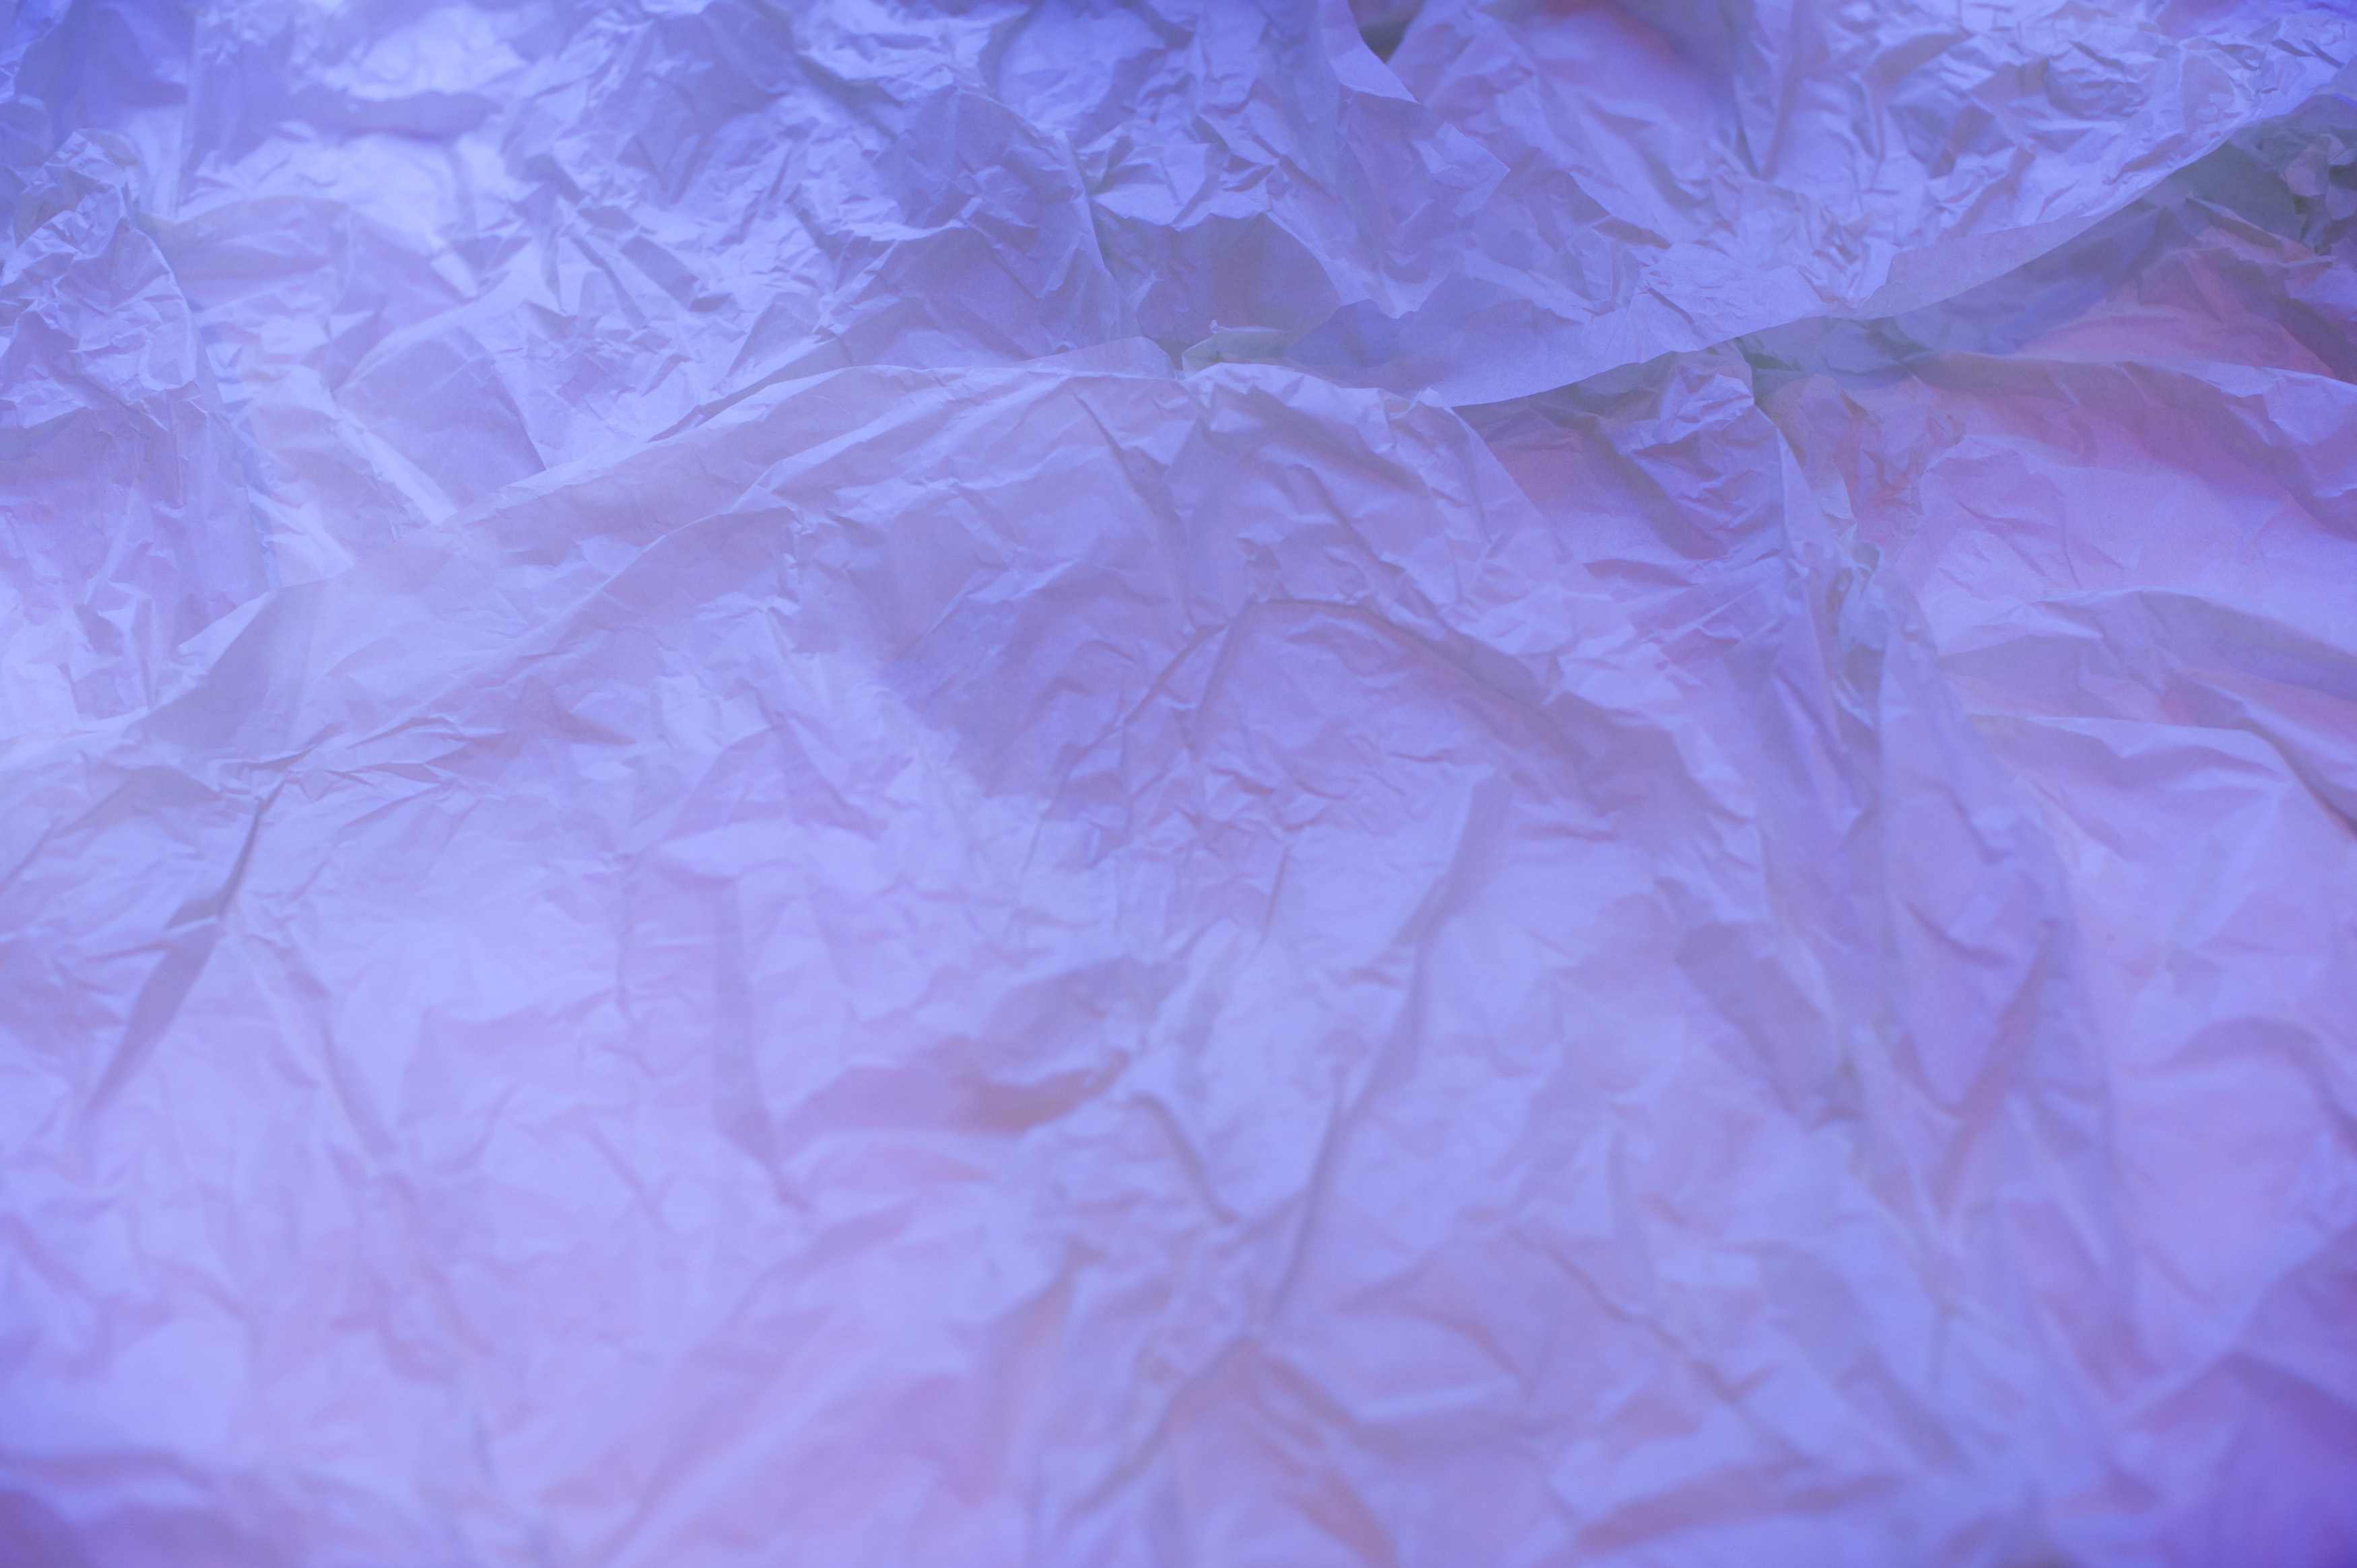 Free image of Purple tissue paper background